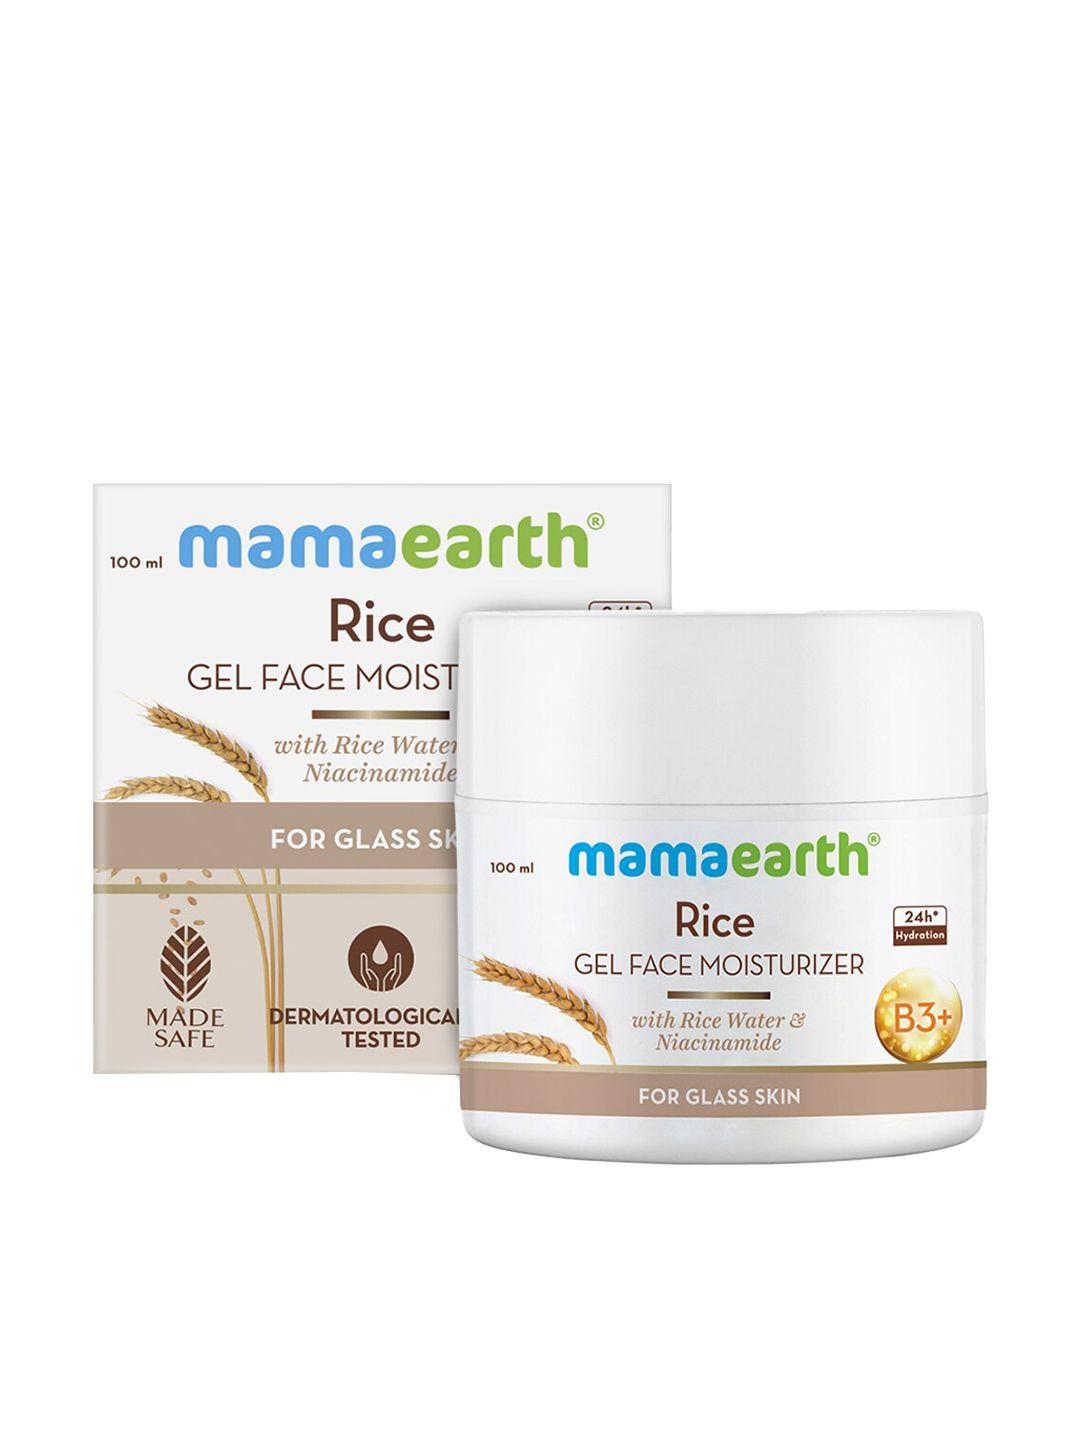 mamaearth rice gel face moisturizer with rice water & niacinamide 100 ml